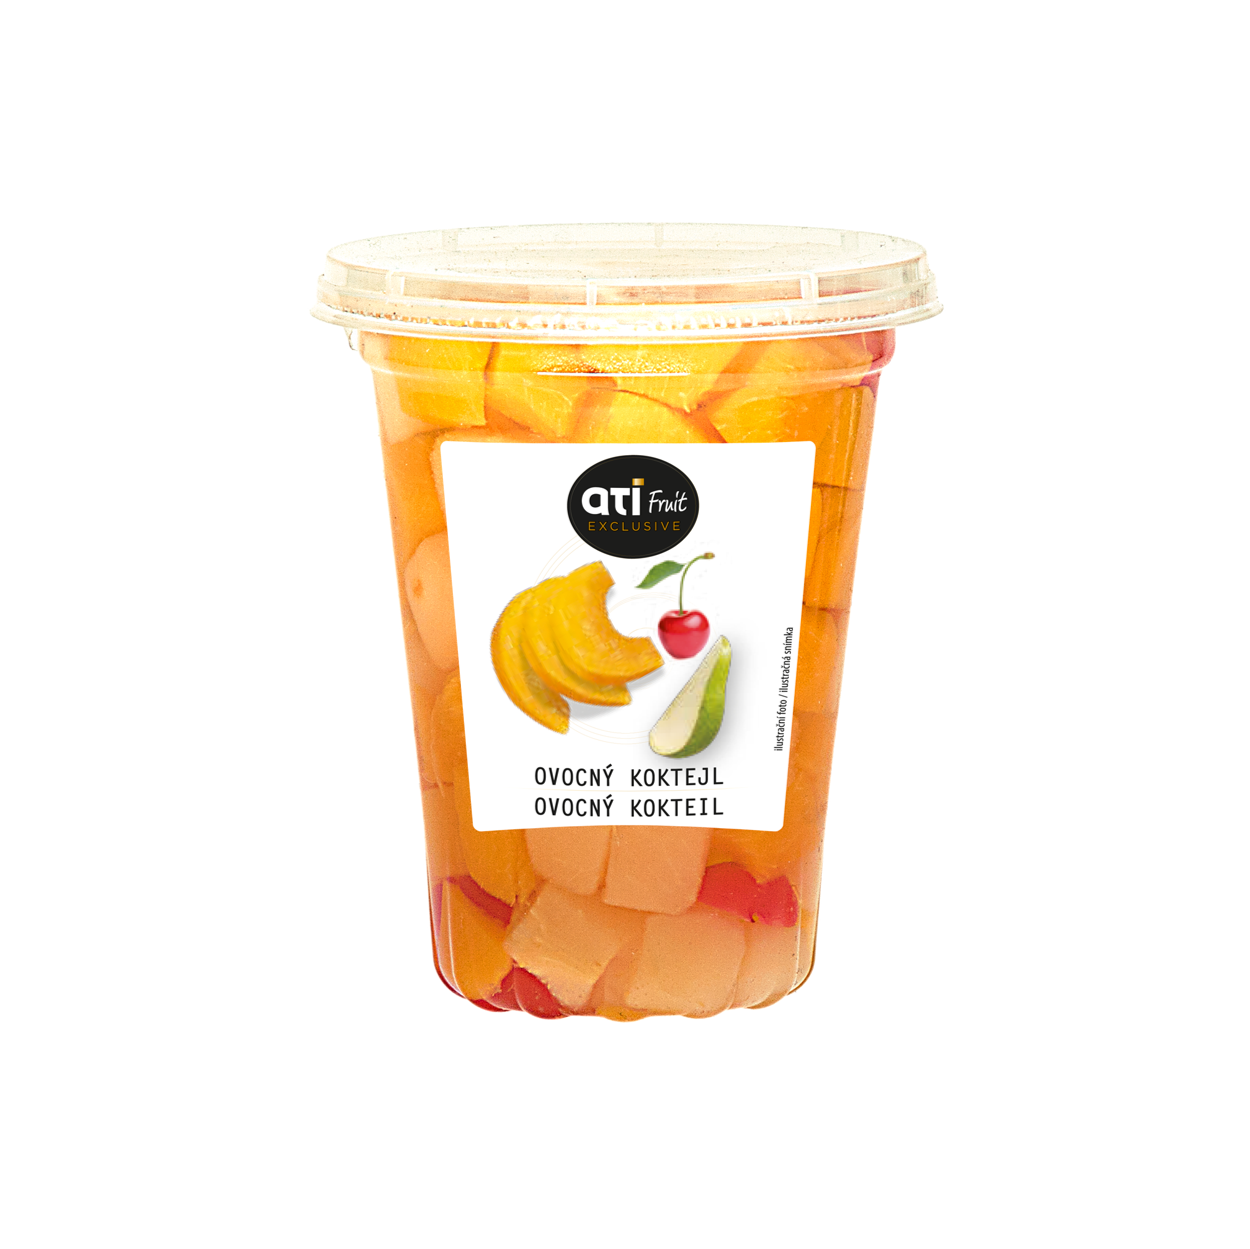 ATI Fruit Exclusive fruit cocktail family pack